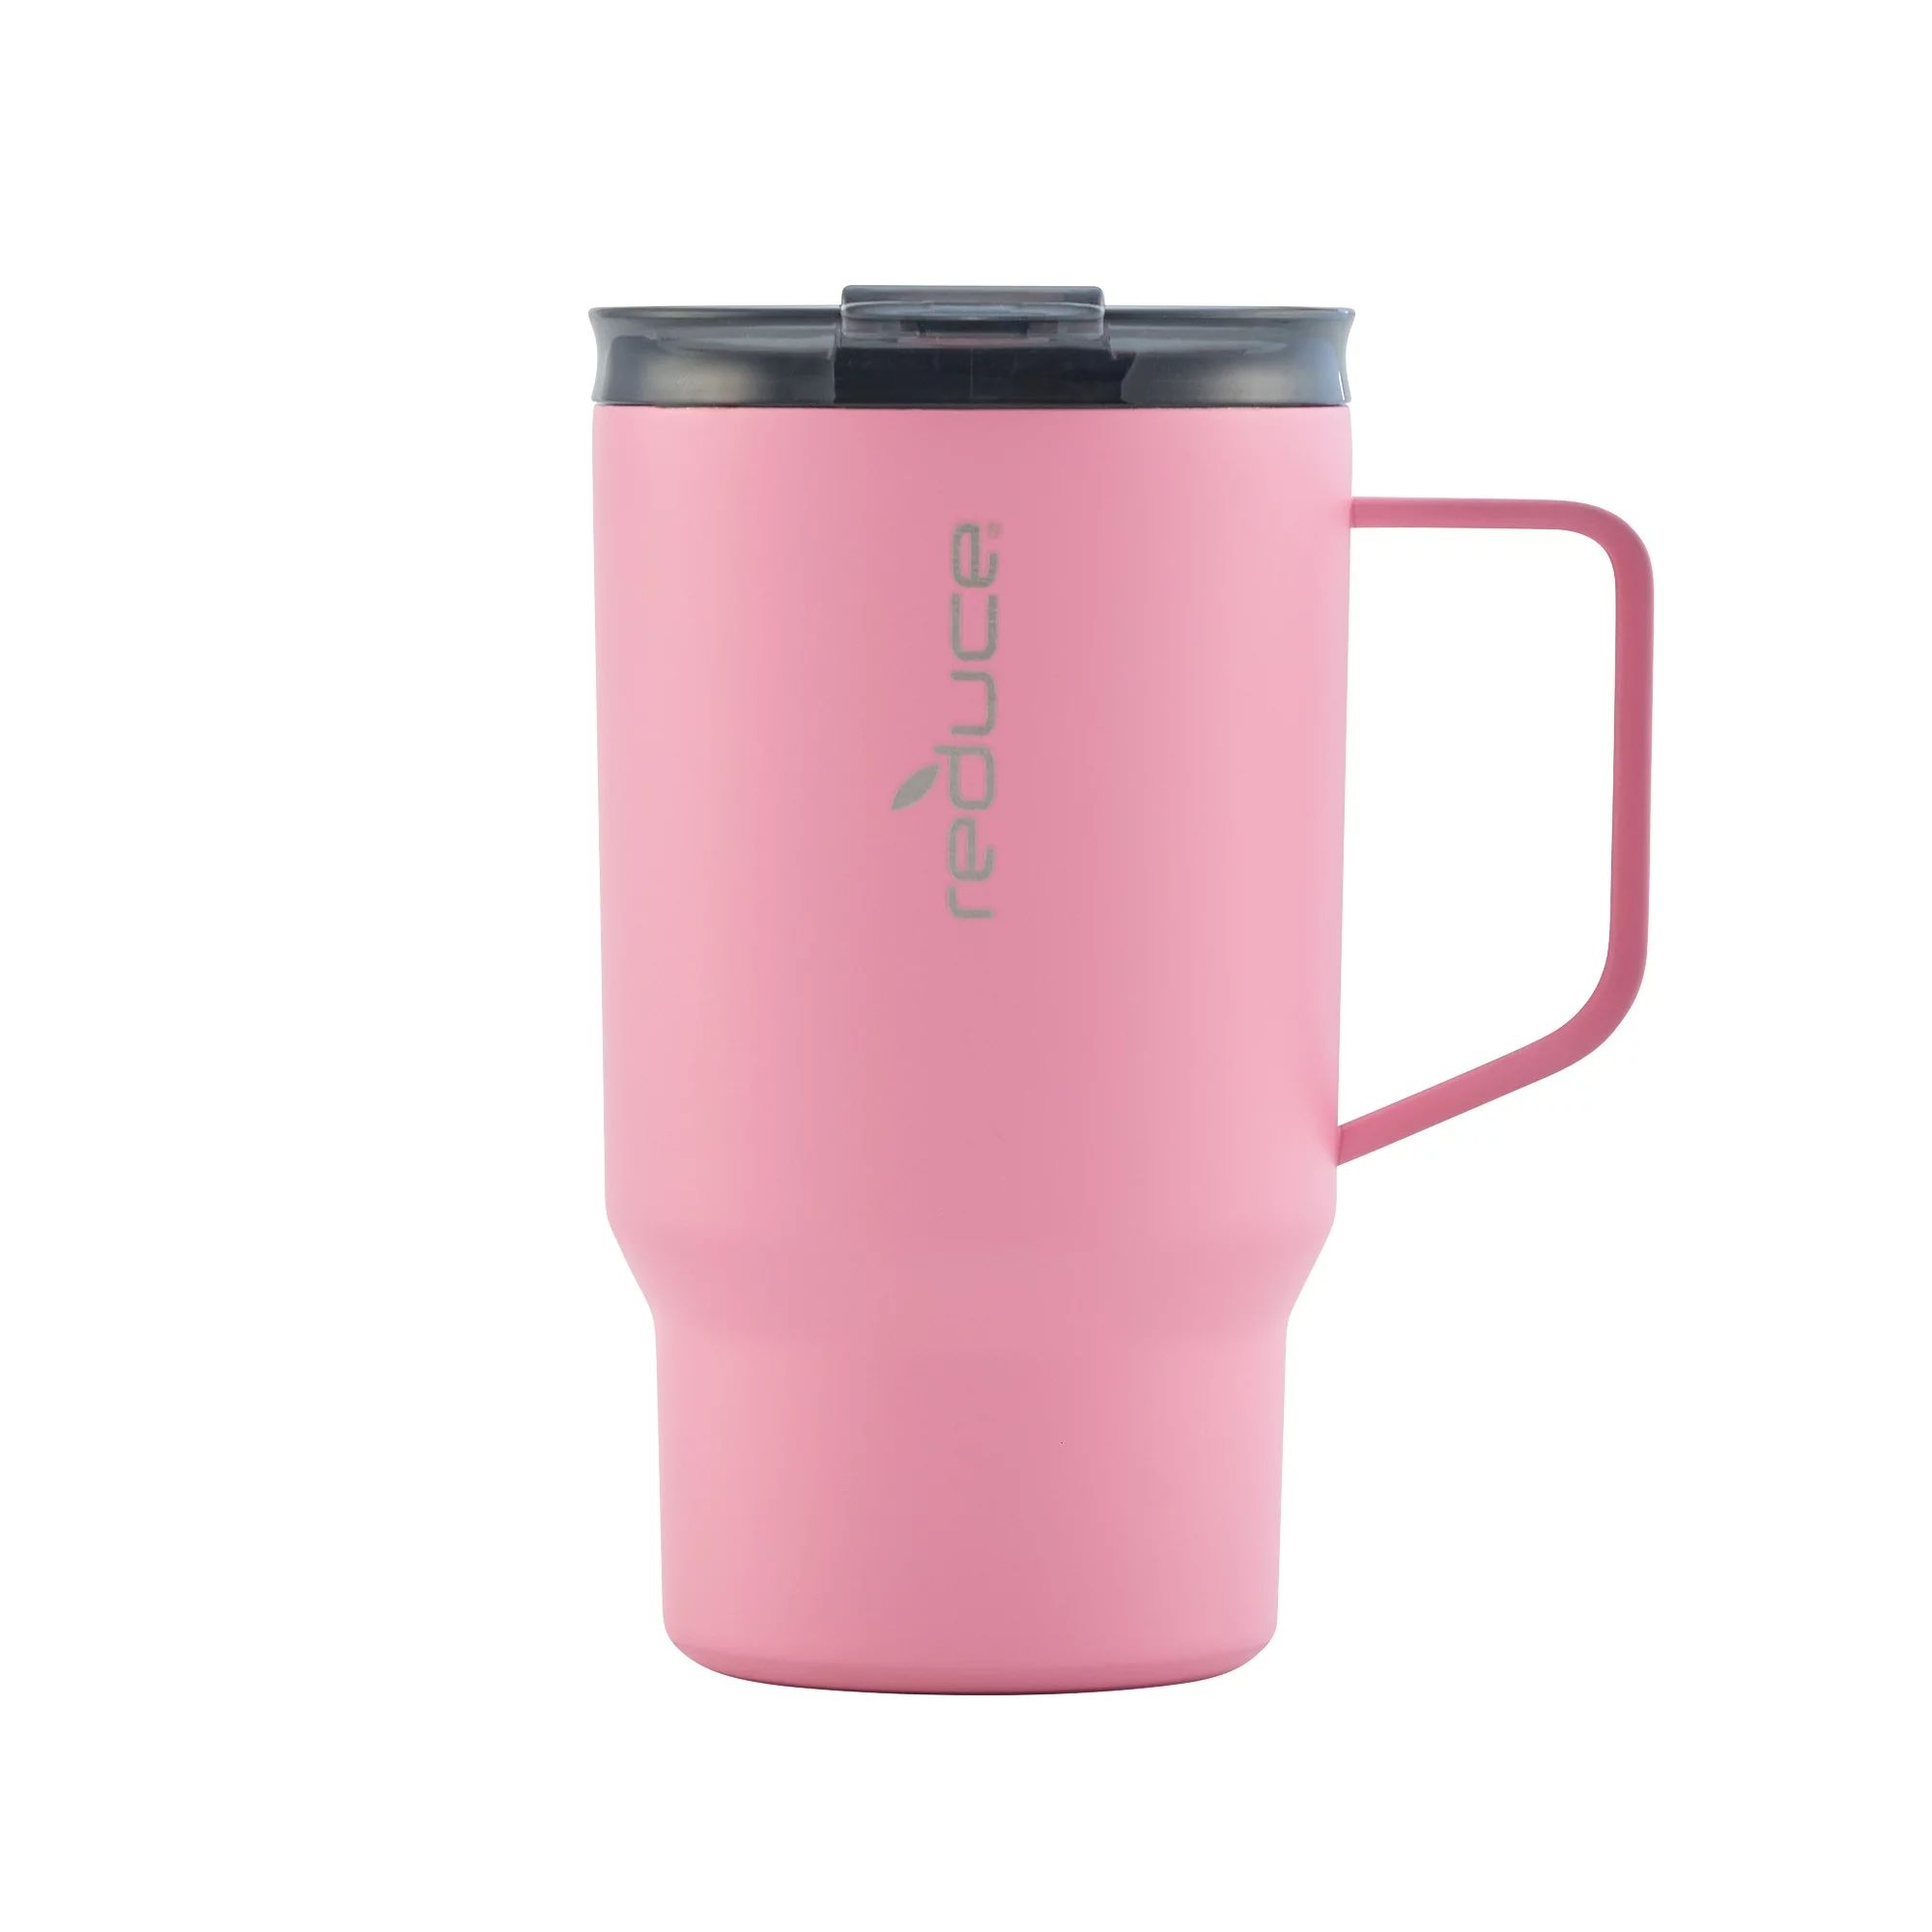 Reduce Vacuum Insulated Stainless Steel Hot1 Mug with Lid and Handle, Fierce Pink, 18 oz. | Walmart (US)